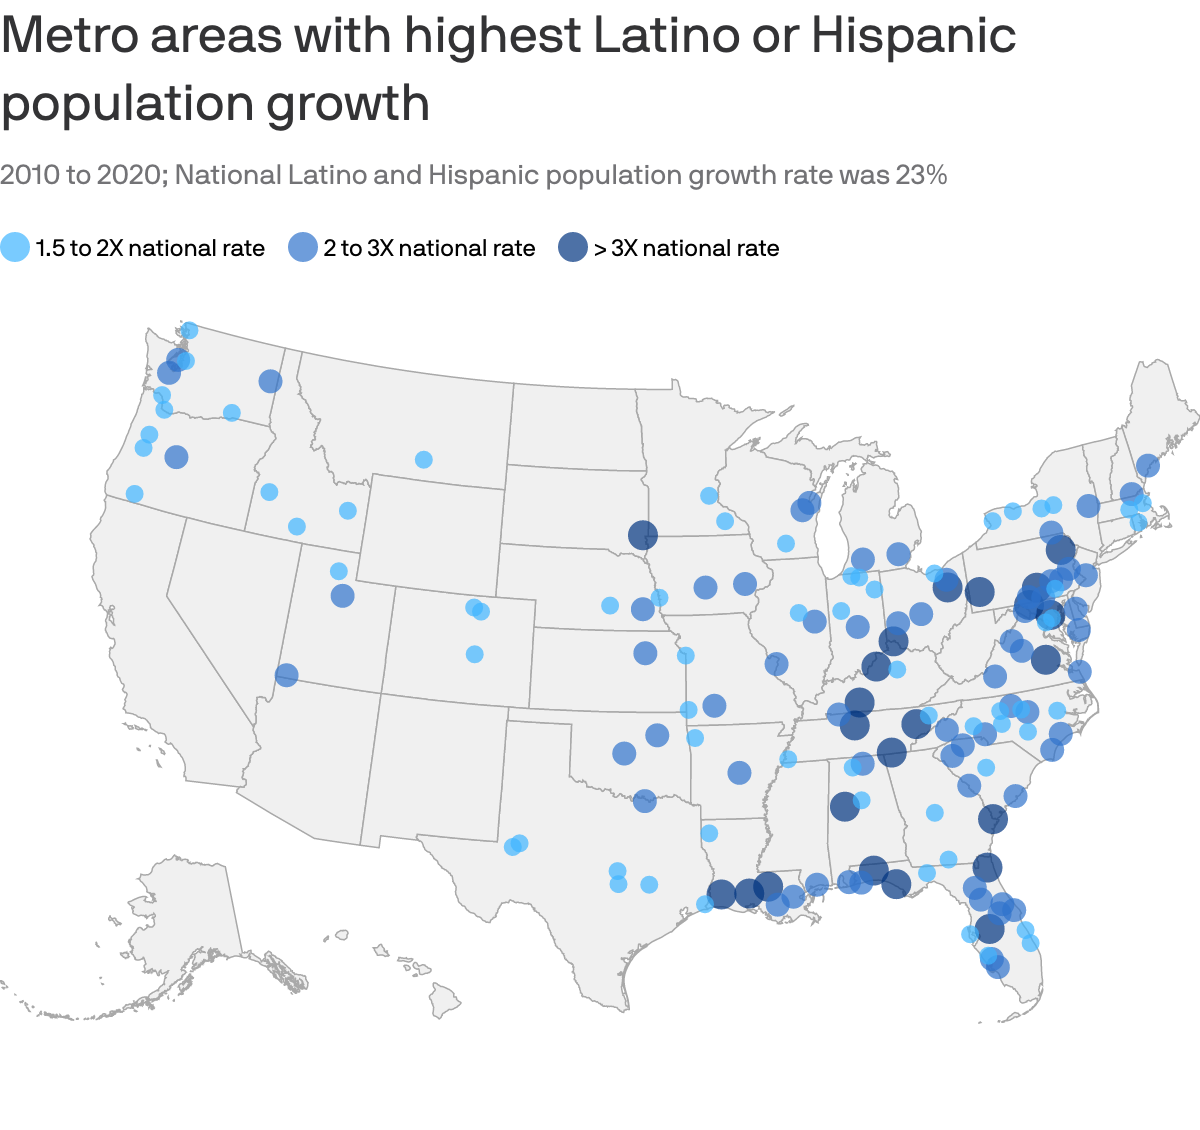 A map of metro areas with the highest Latino or Hispanic population growth